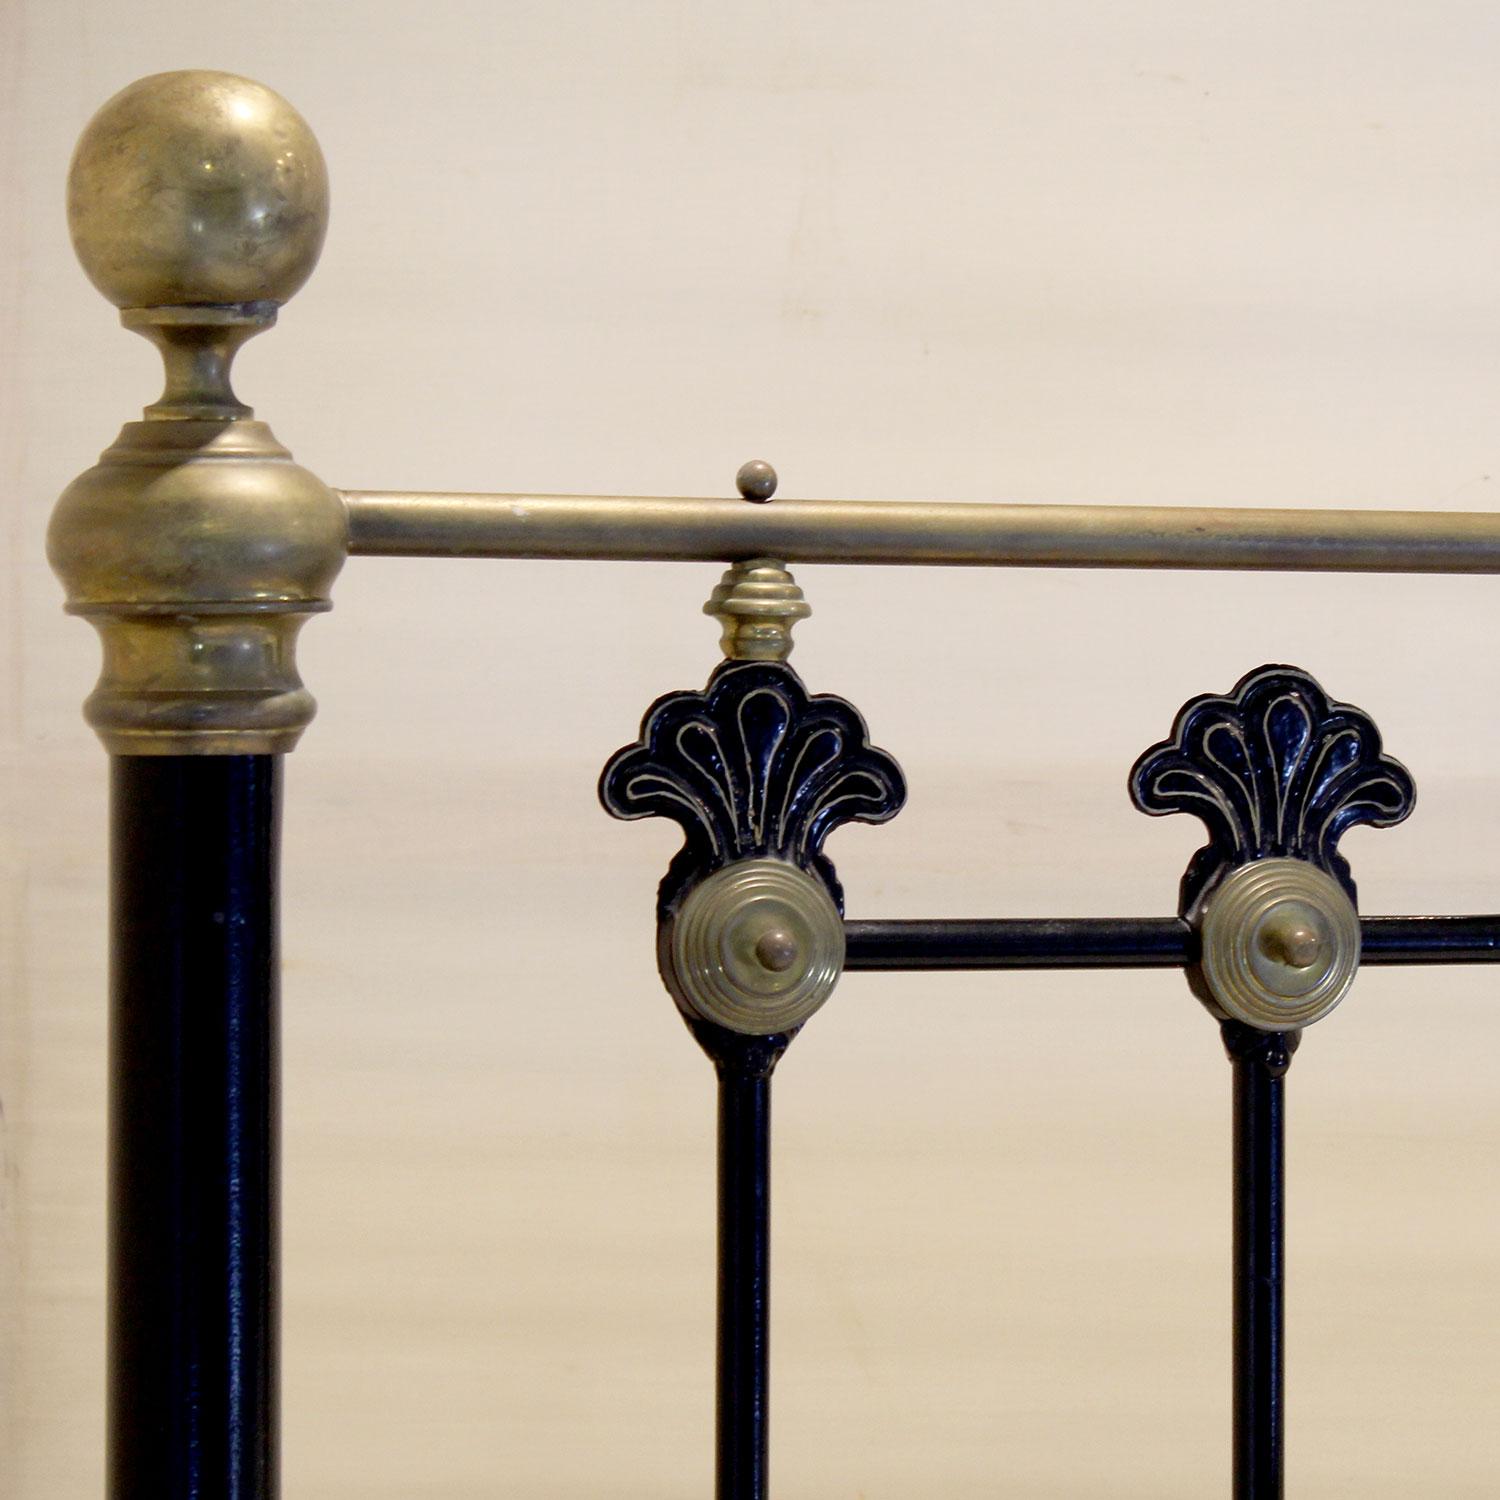 Wide Decorative Brass and Iron Victorian Bed in Black, MSK75 4